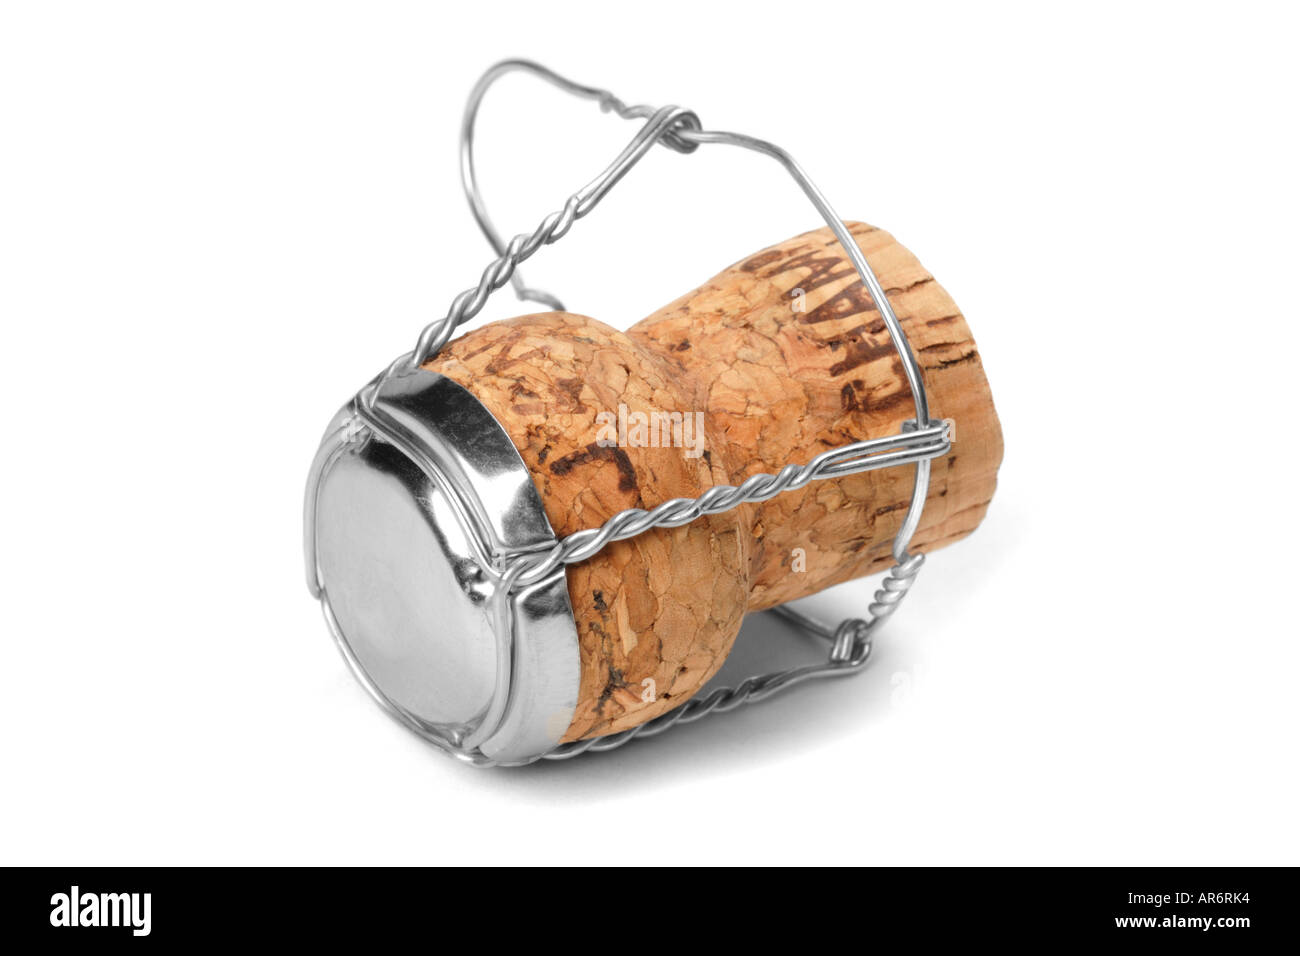 Premium Photo  Close-up of a champagne cork with its cage. cork has a date  of 2021